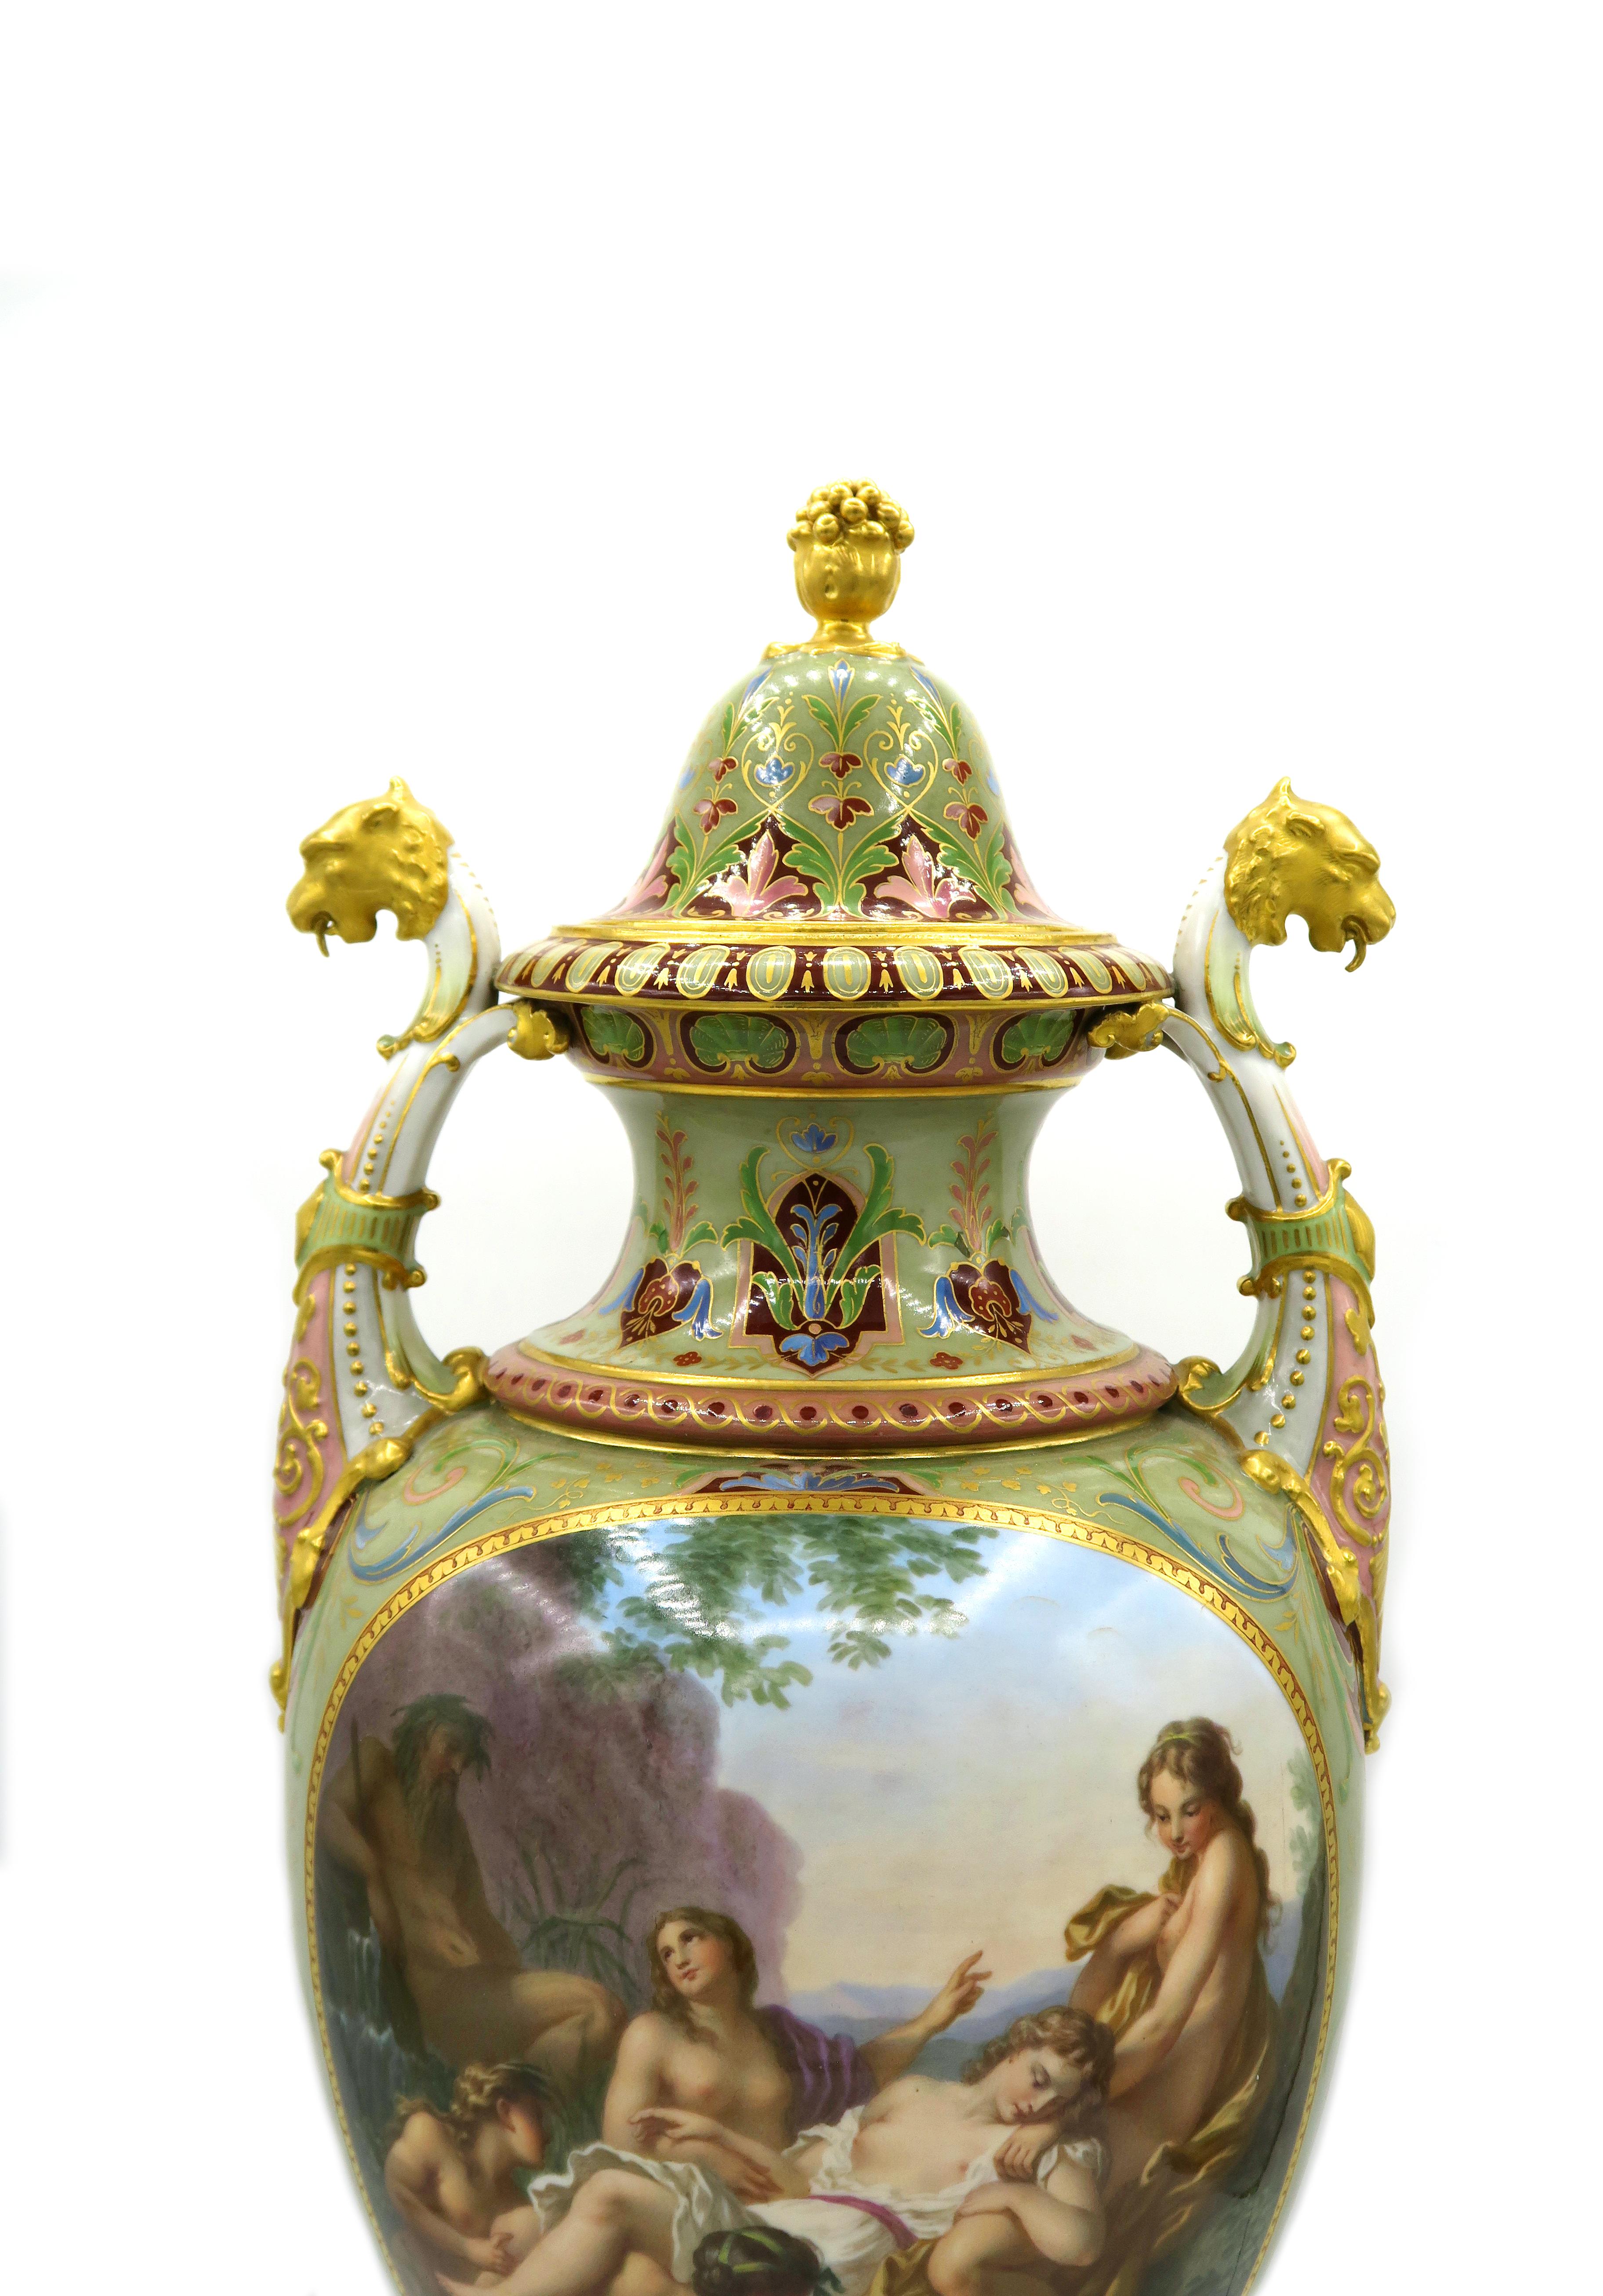 Mid-19th century Meissen Magnificent vase

Model by E.A. Leuteritz.
Large medallions on both sides with wonderful, finely painted 